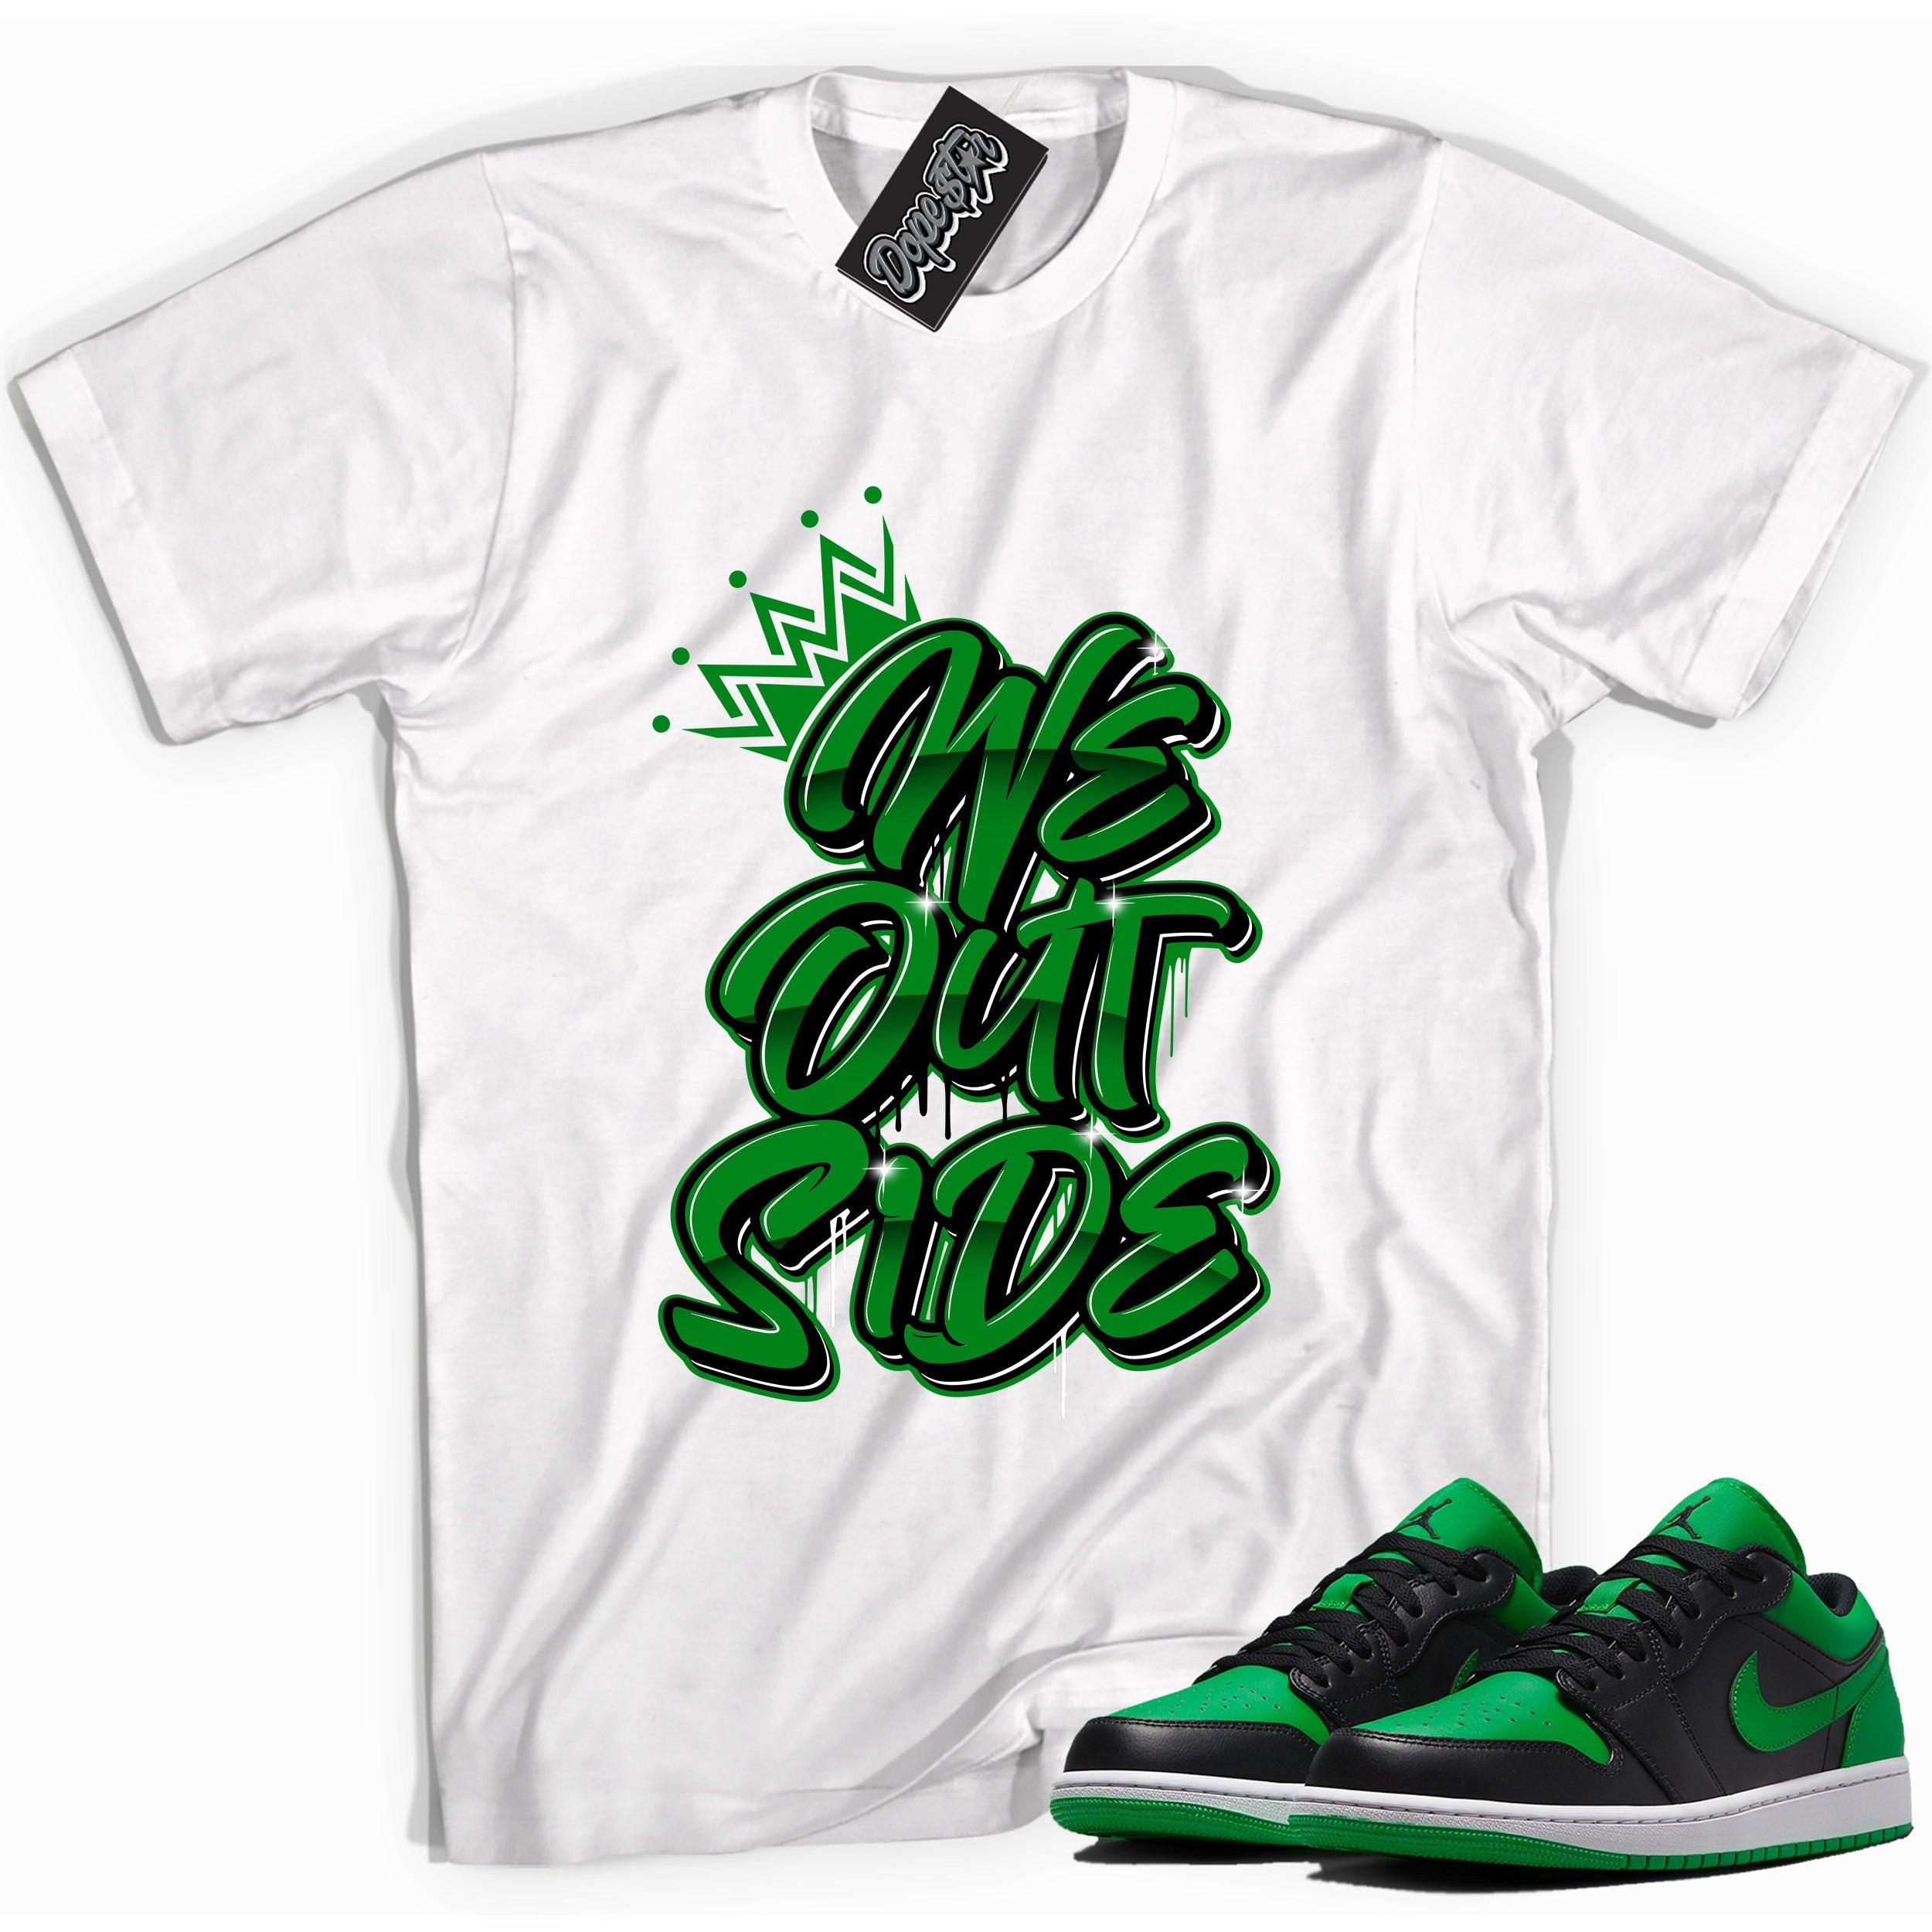 Cool white graphic tee with 'we outside' print, that perfectly matches Air Jordan 1 Low Lucky Green sneakers